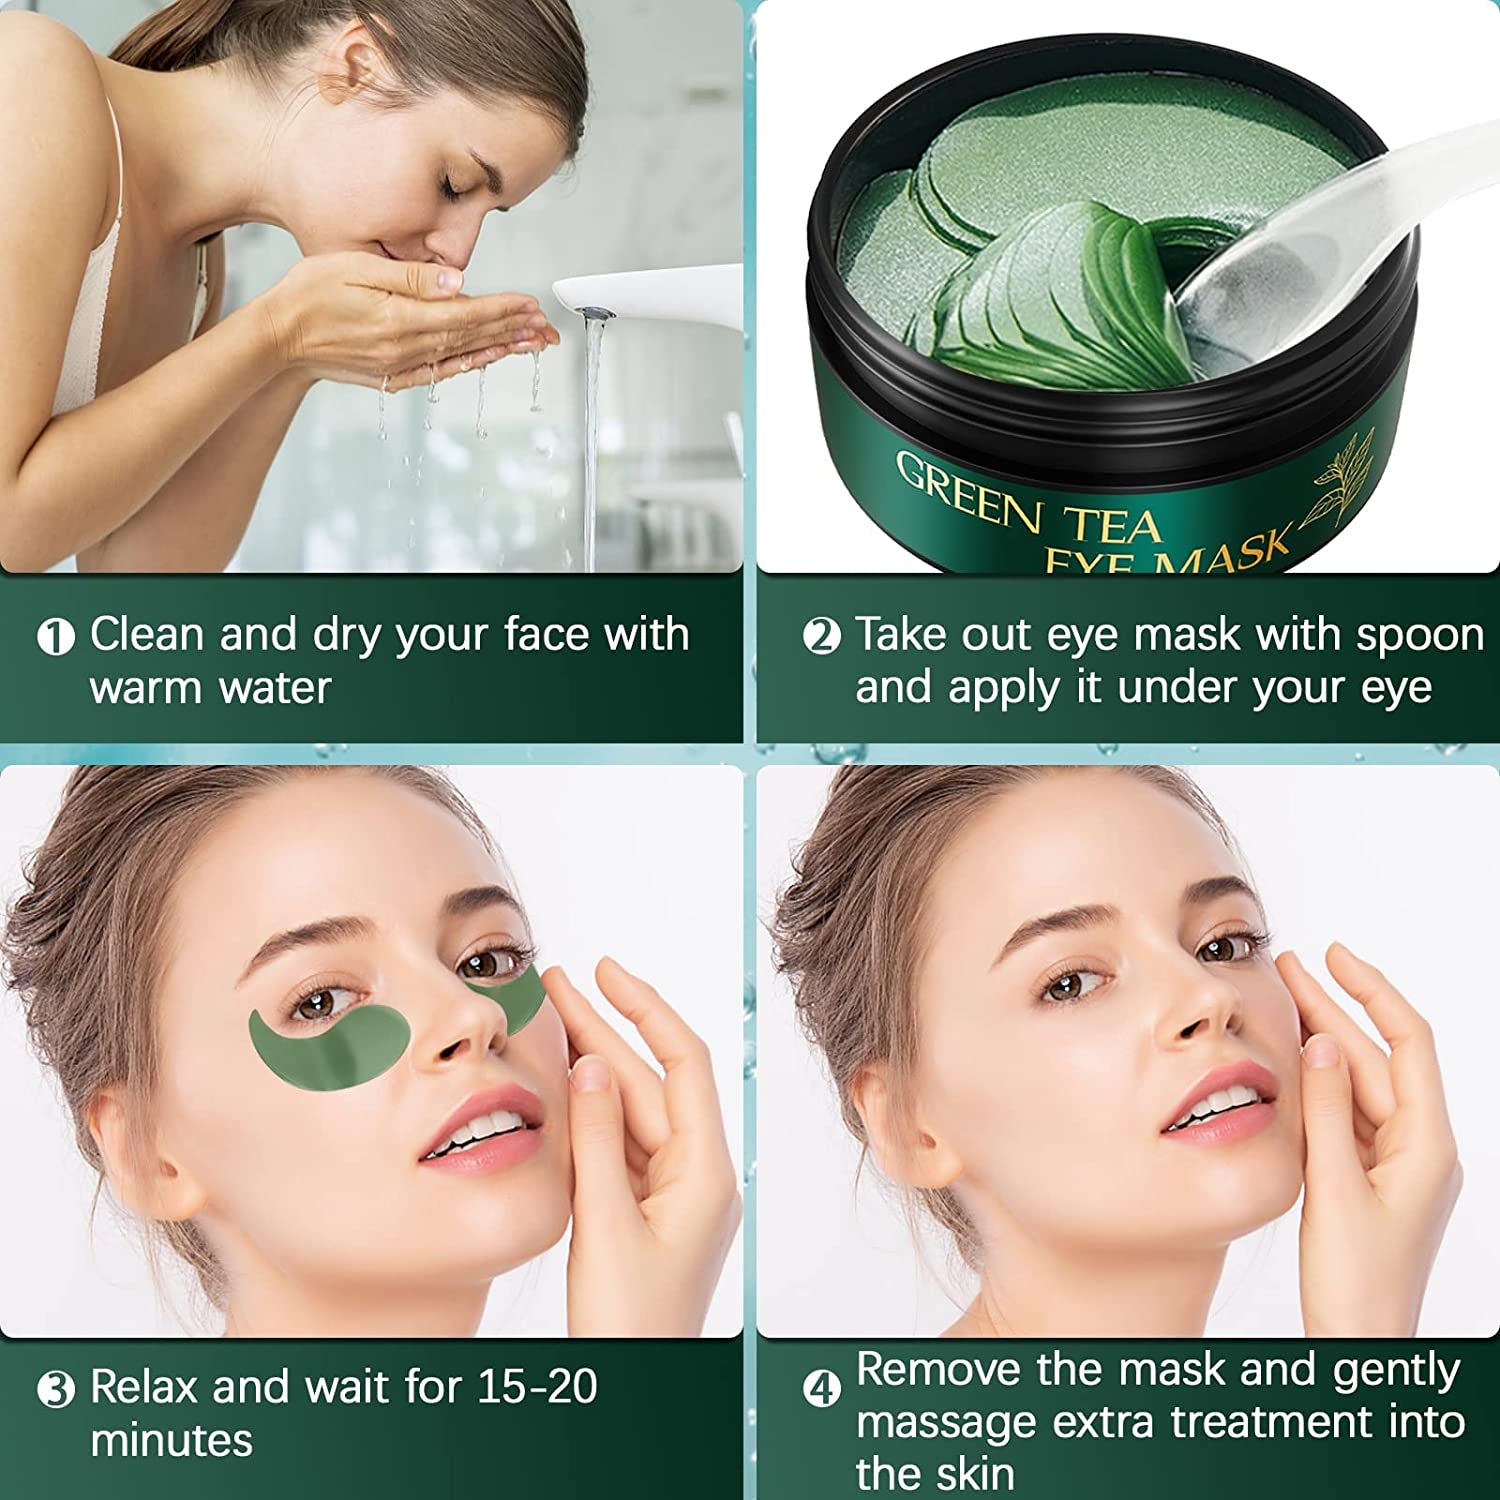 Hydrogel Eye Masks - Reduce Dark Circles, Puffiness, and Wrinkles